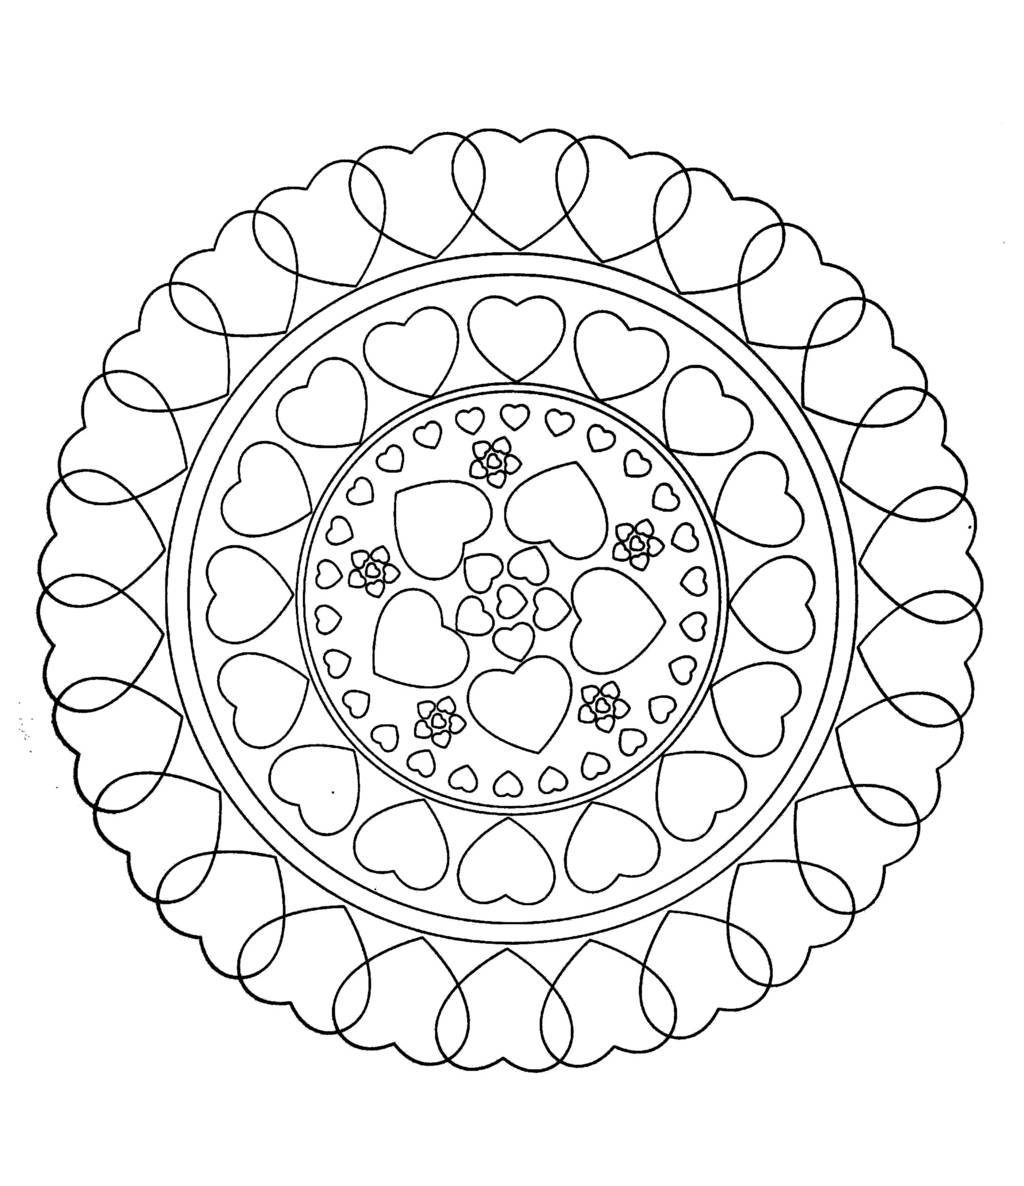 Free Mandala To Color Hearts Love Coloring Page